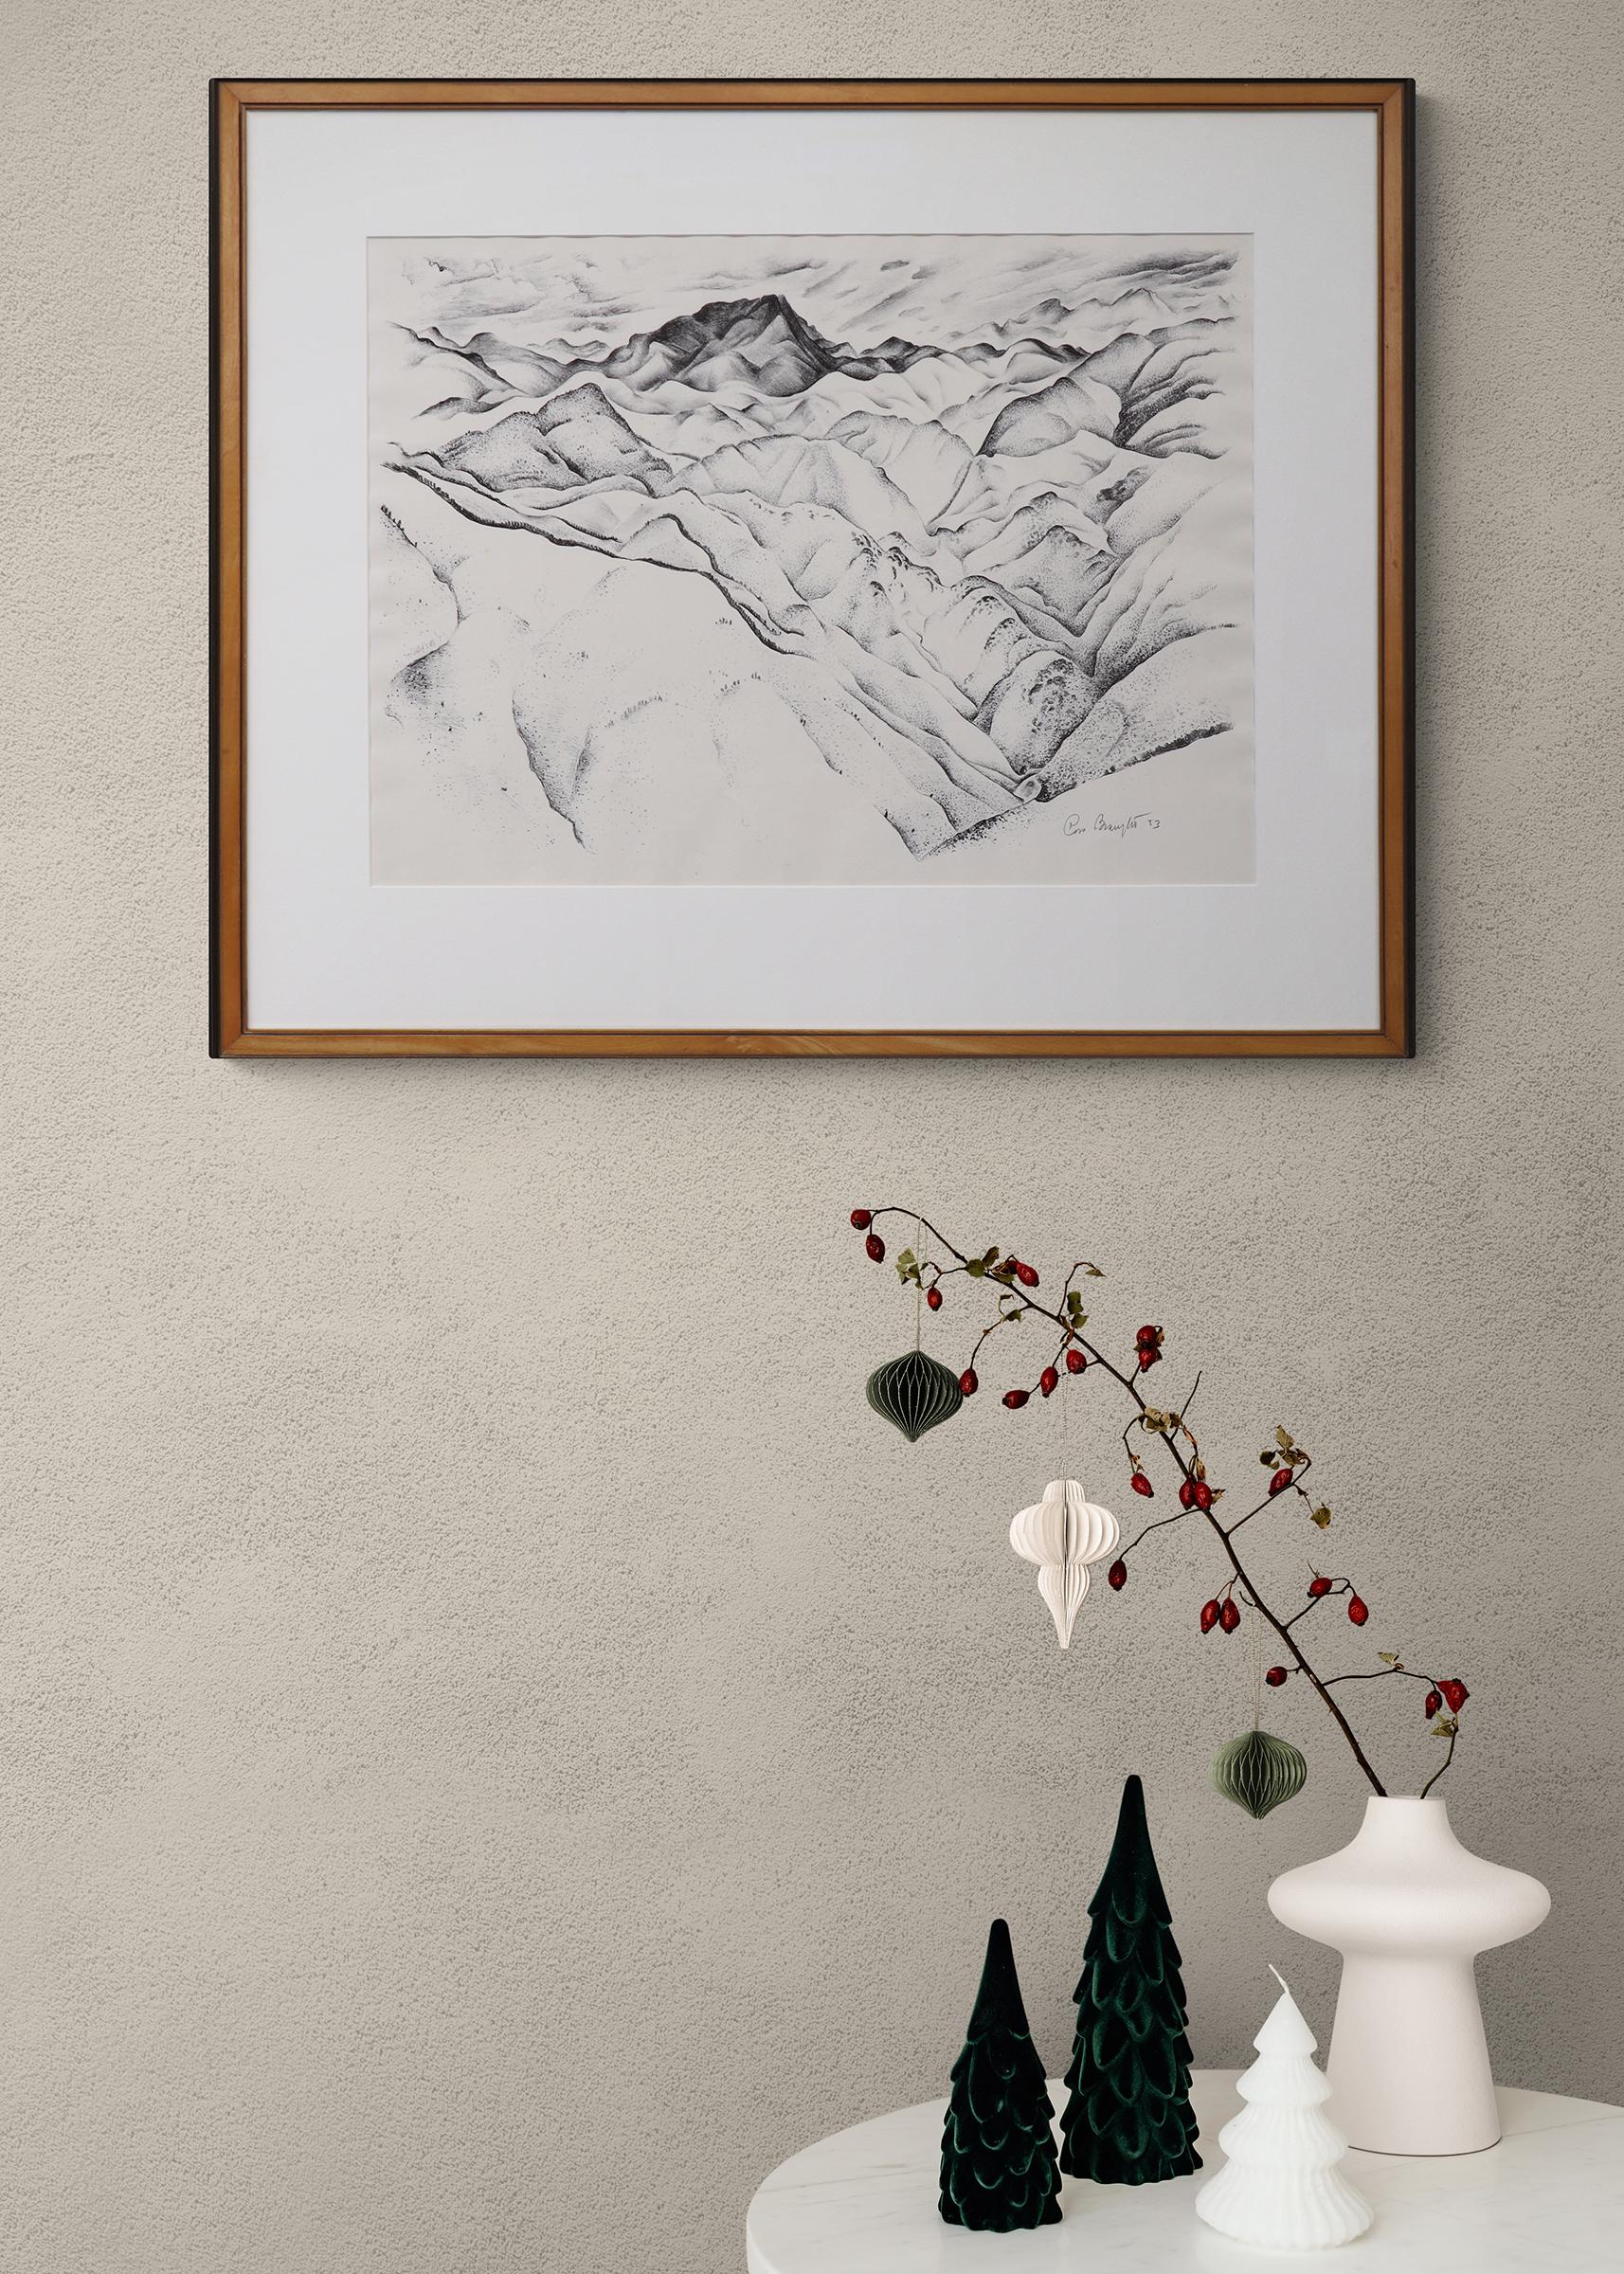 Original lithograph by Ross Eugene Braught (1898-1983) titled 'Clear Creek Canyon I (Colorado)' from 1933. Pencil signed by the artist in the lower right margin. Presented in a custom frame with all archival materials measuring 26 ½ x 31 ½ inches,